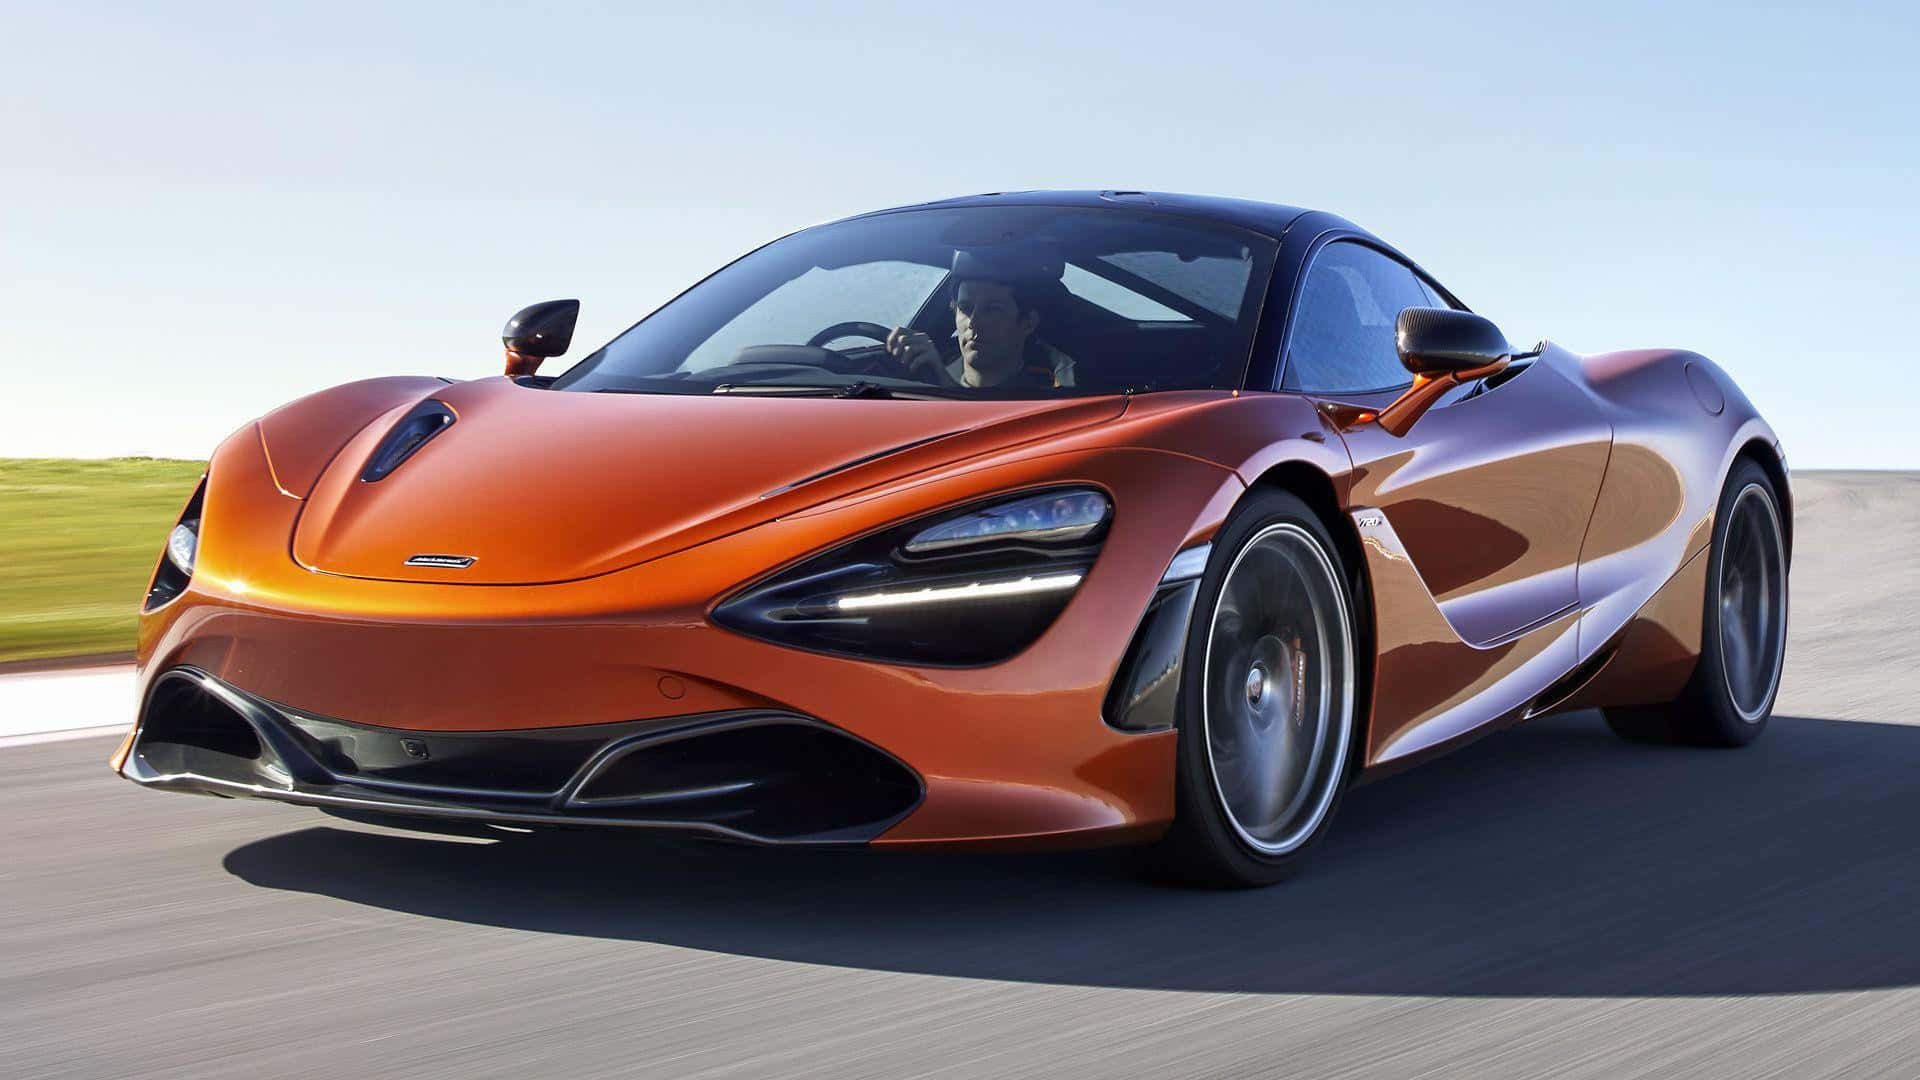 Fresh off the assembly line, experience superior performance with the new McLaren 720S.